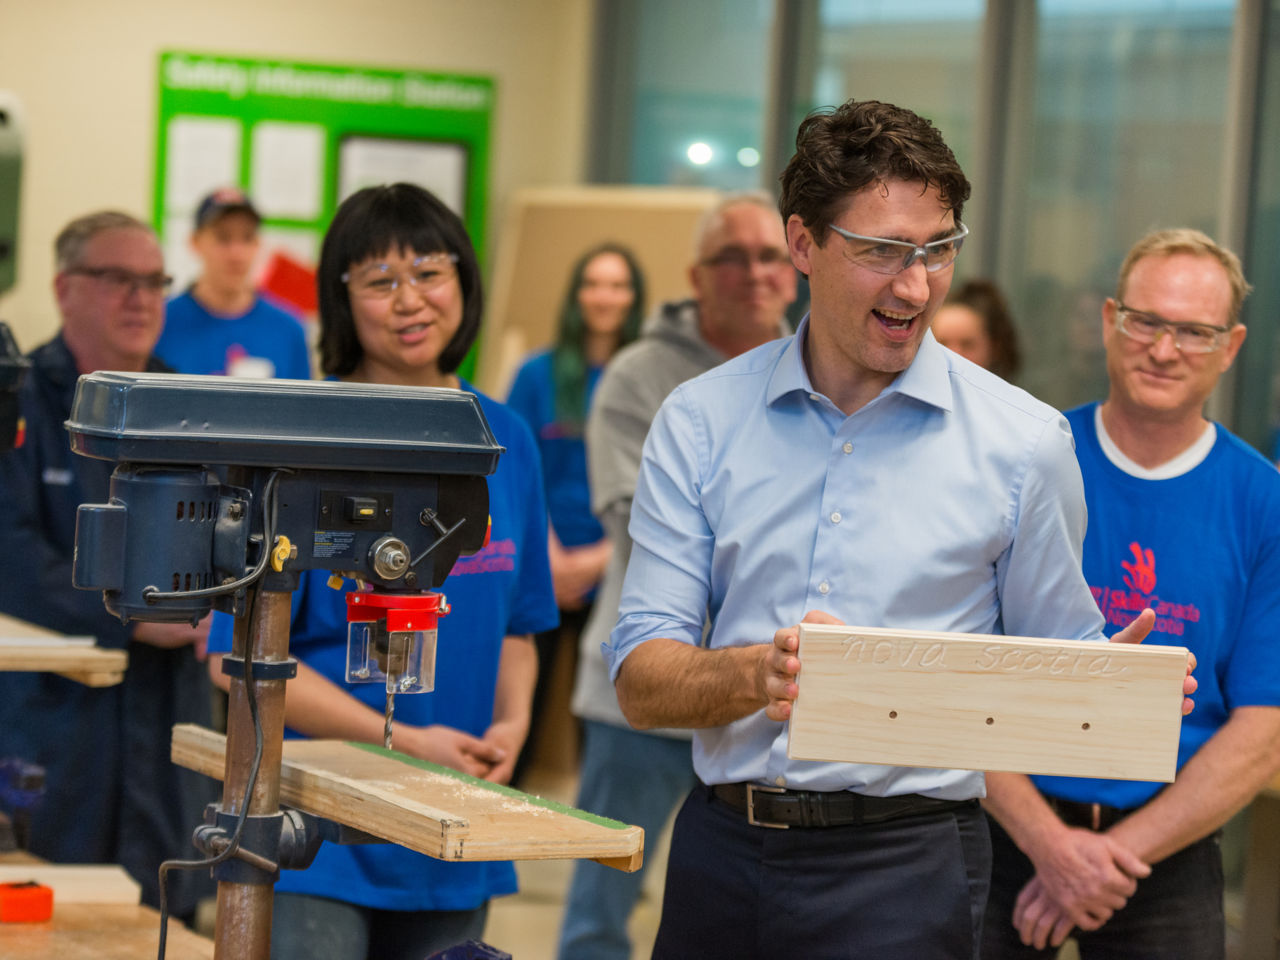 Canadian PM champions skills development in hands-on fashion